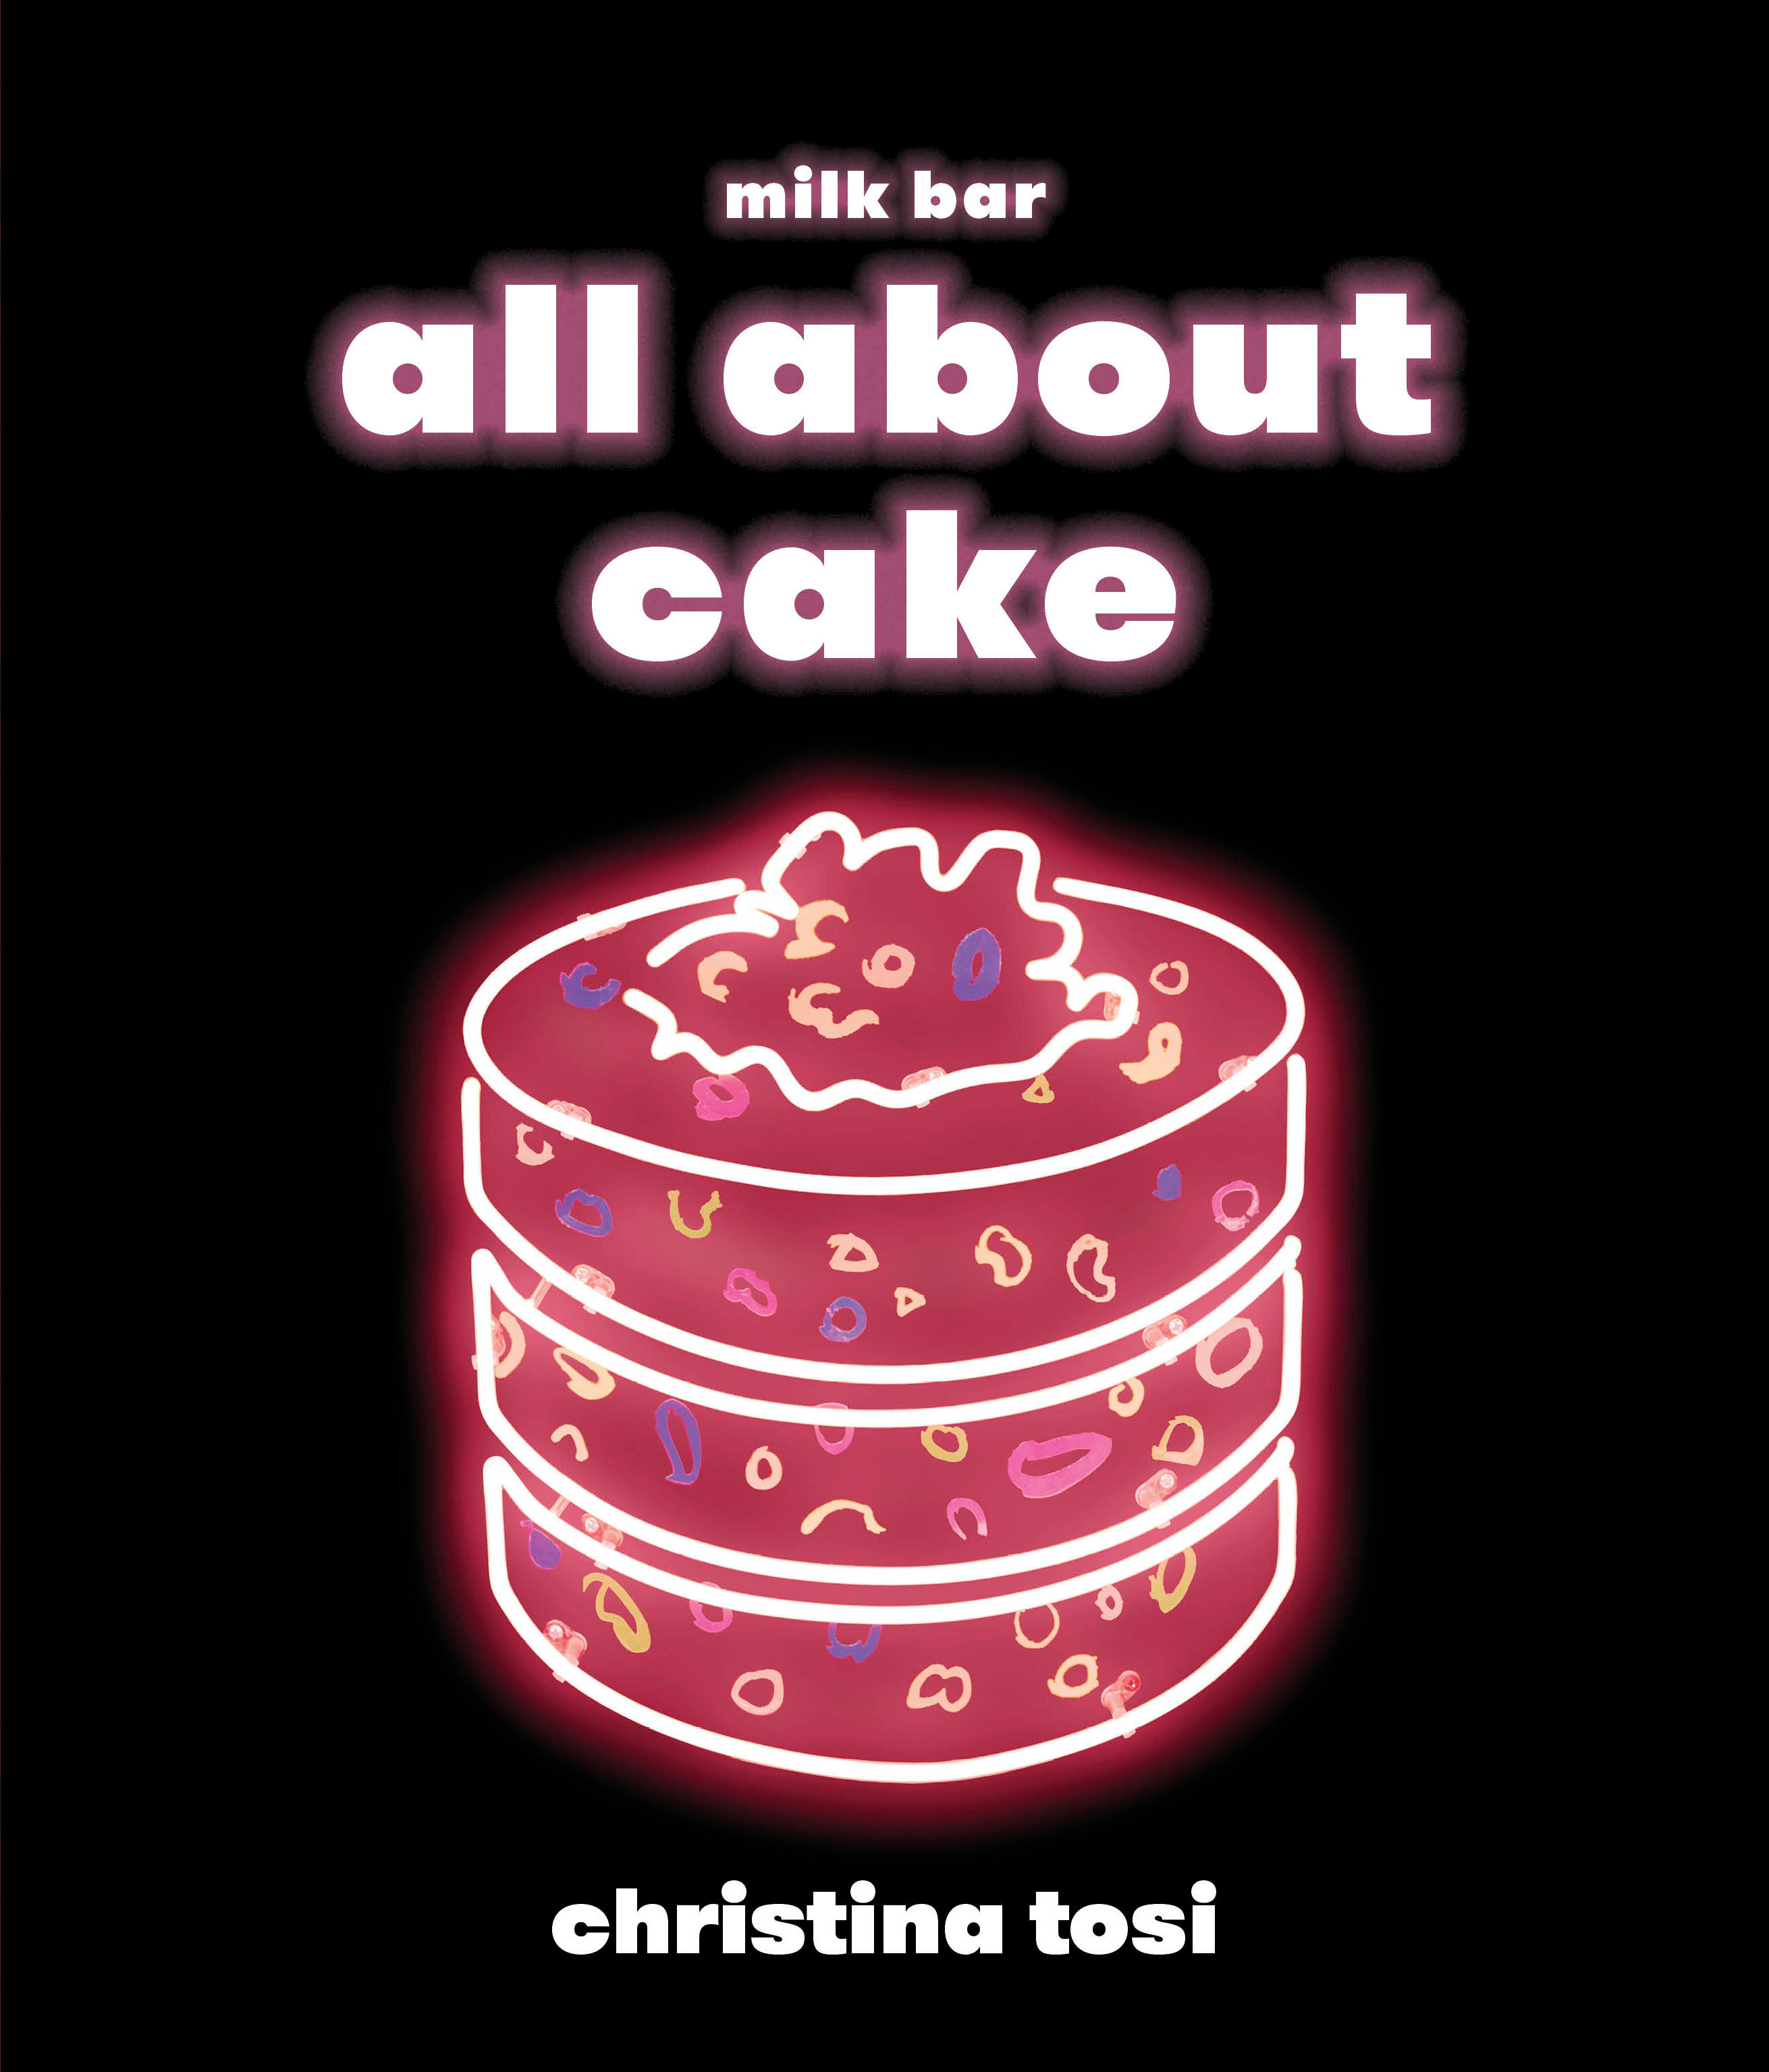 All About Cake A Milk Bar Cookbook cover image